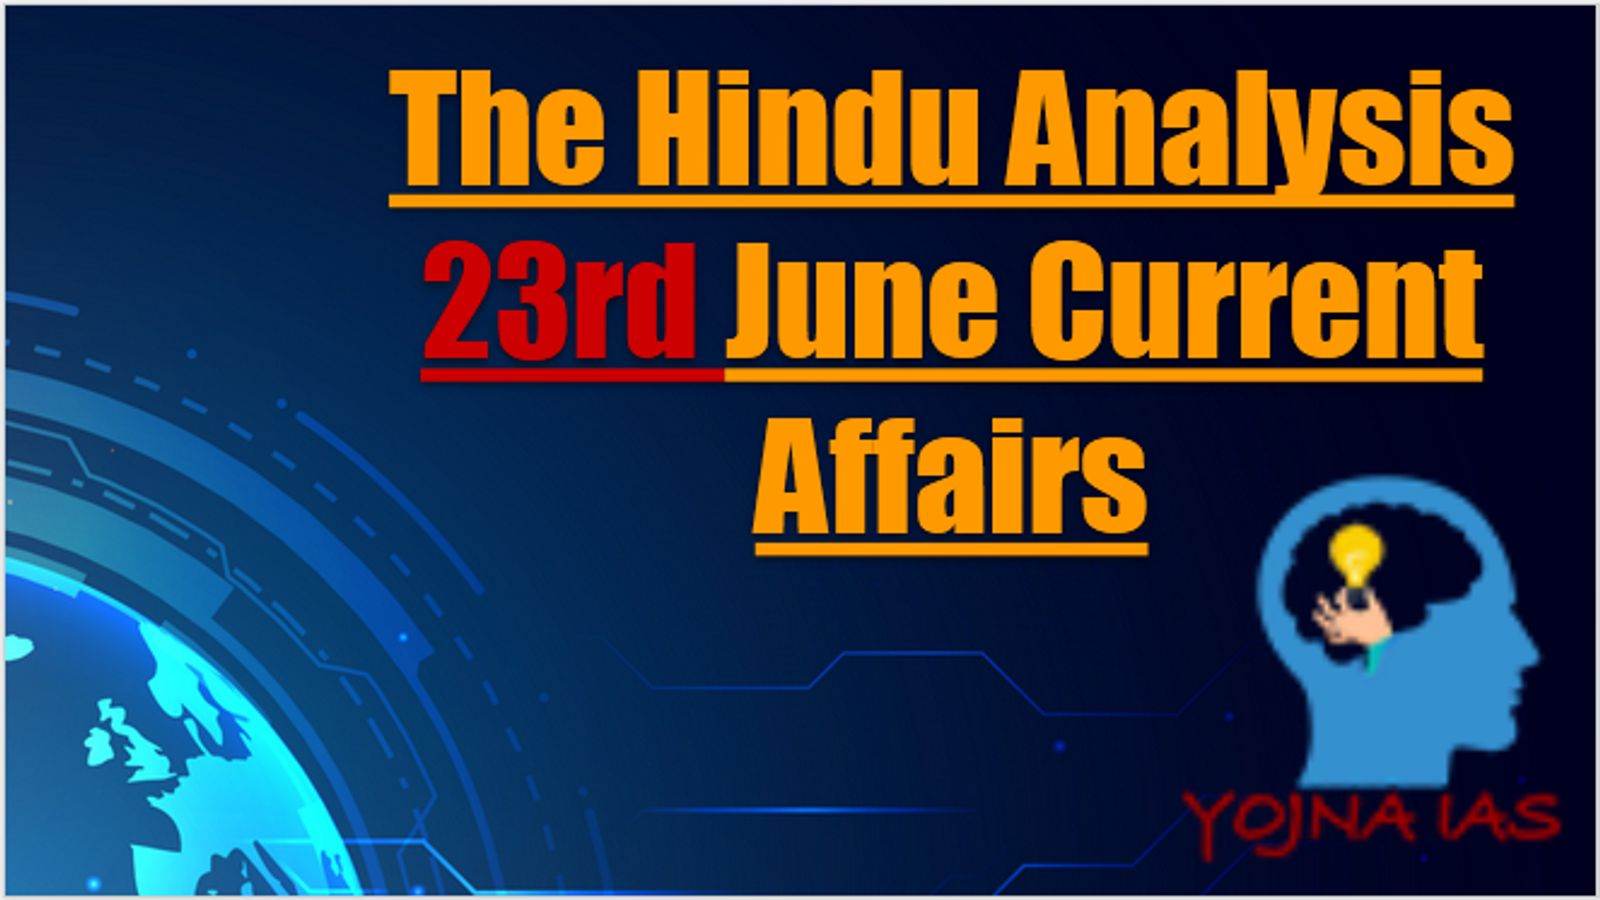 Today Current Affairs 23rd June